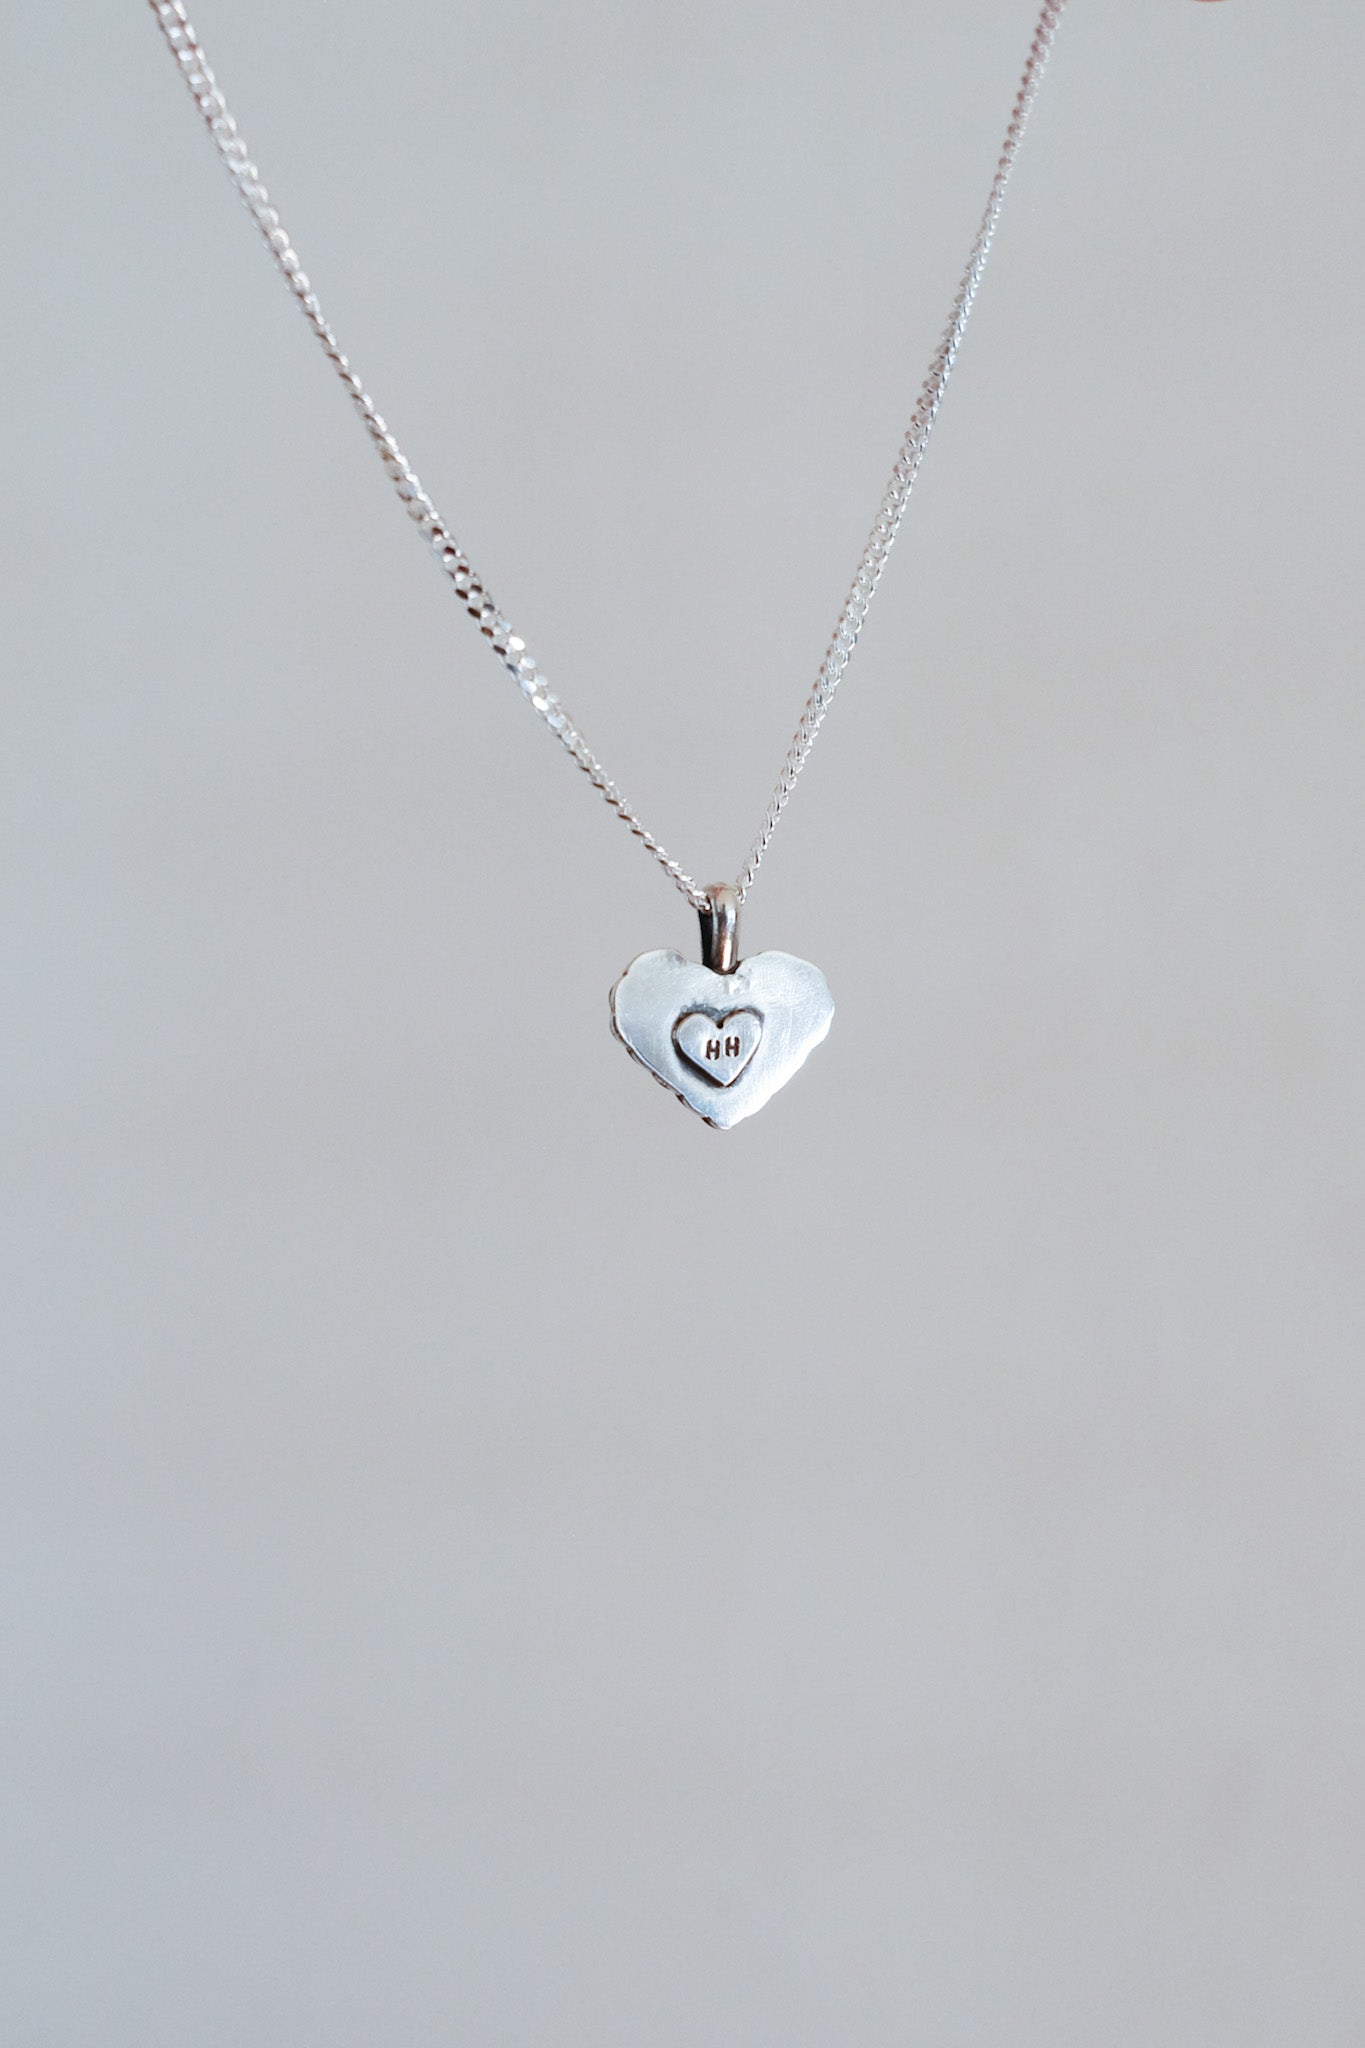 Stand by Your Heart Charm Necklace - Ethiopian Opal